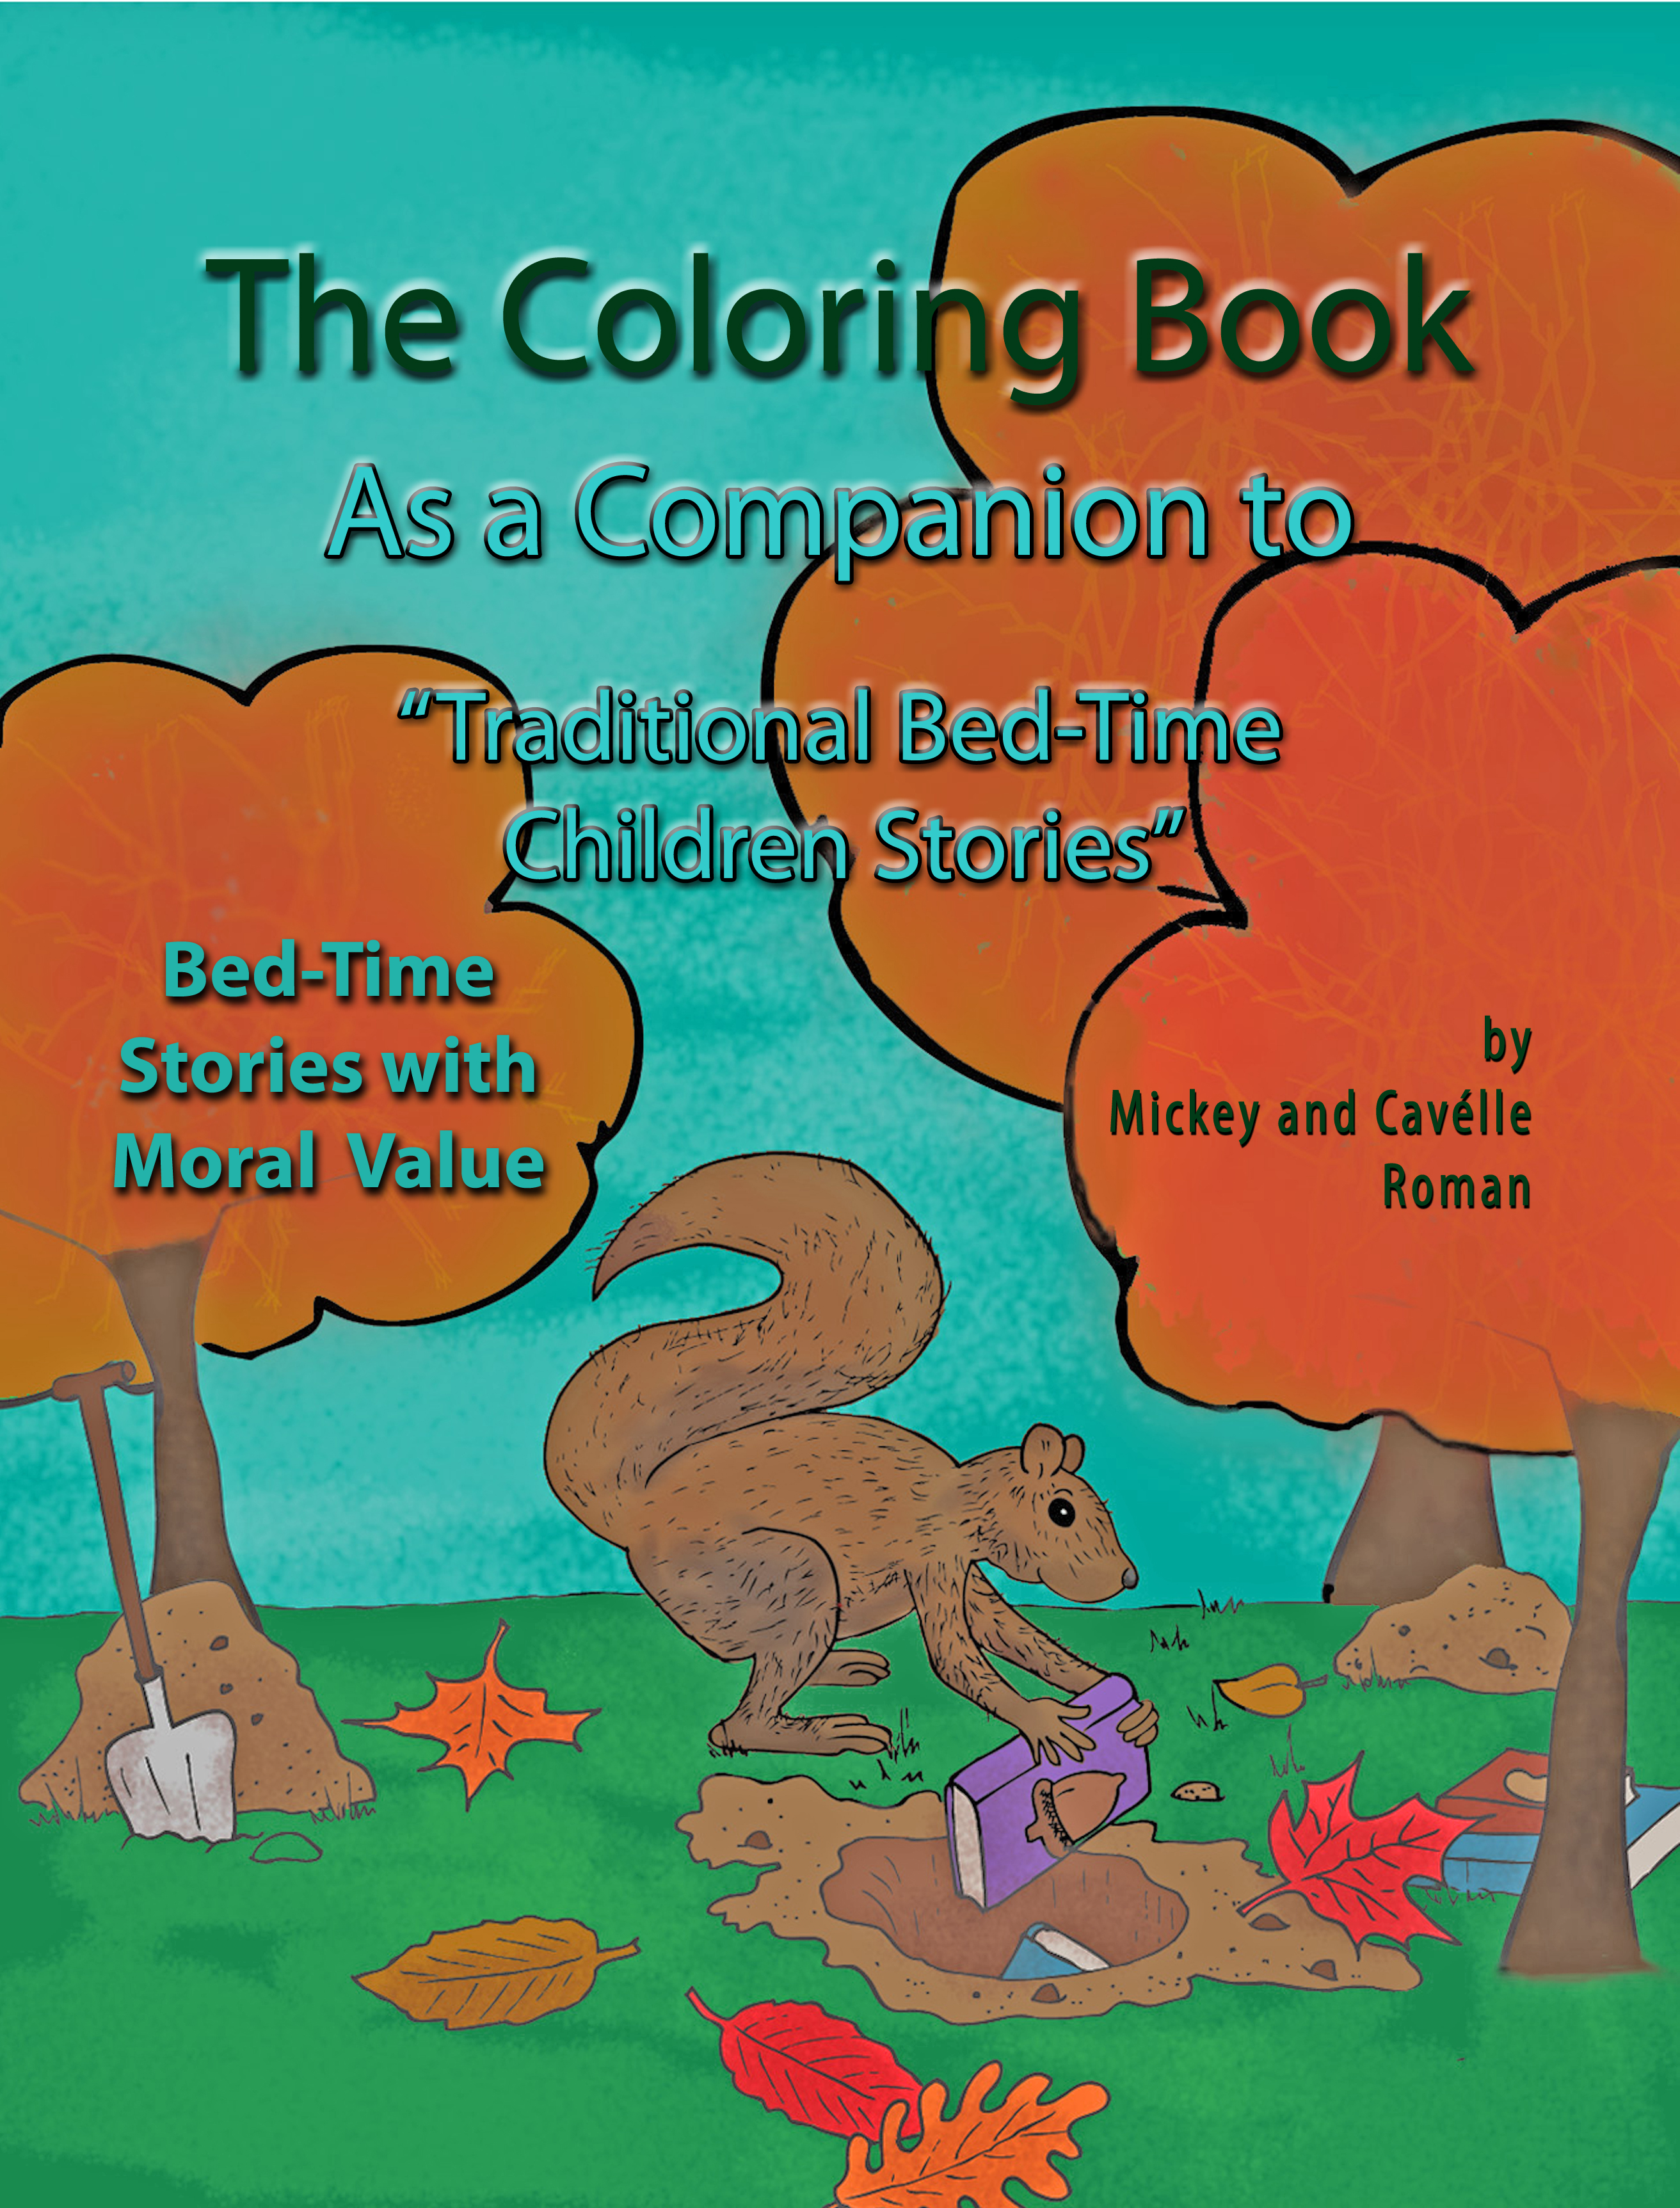 The Coloring Book - A Companion to Traditional Bed-Time Children Stories